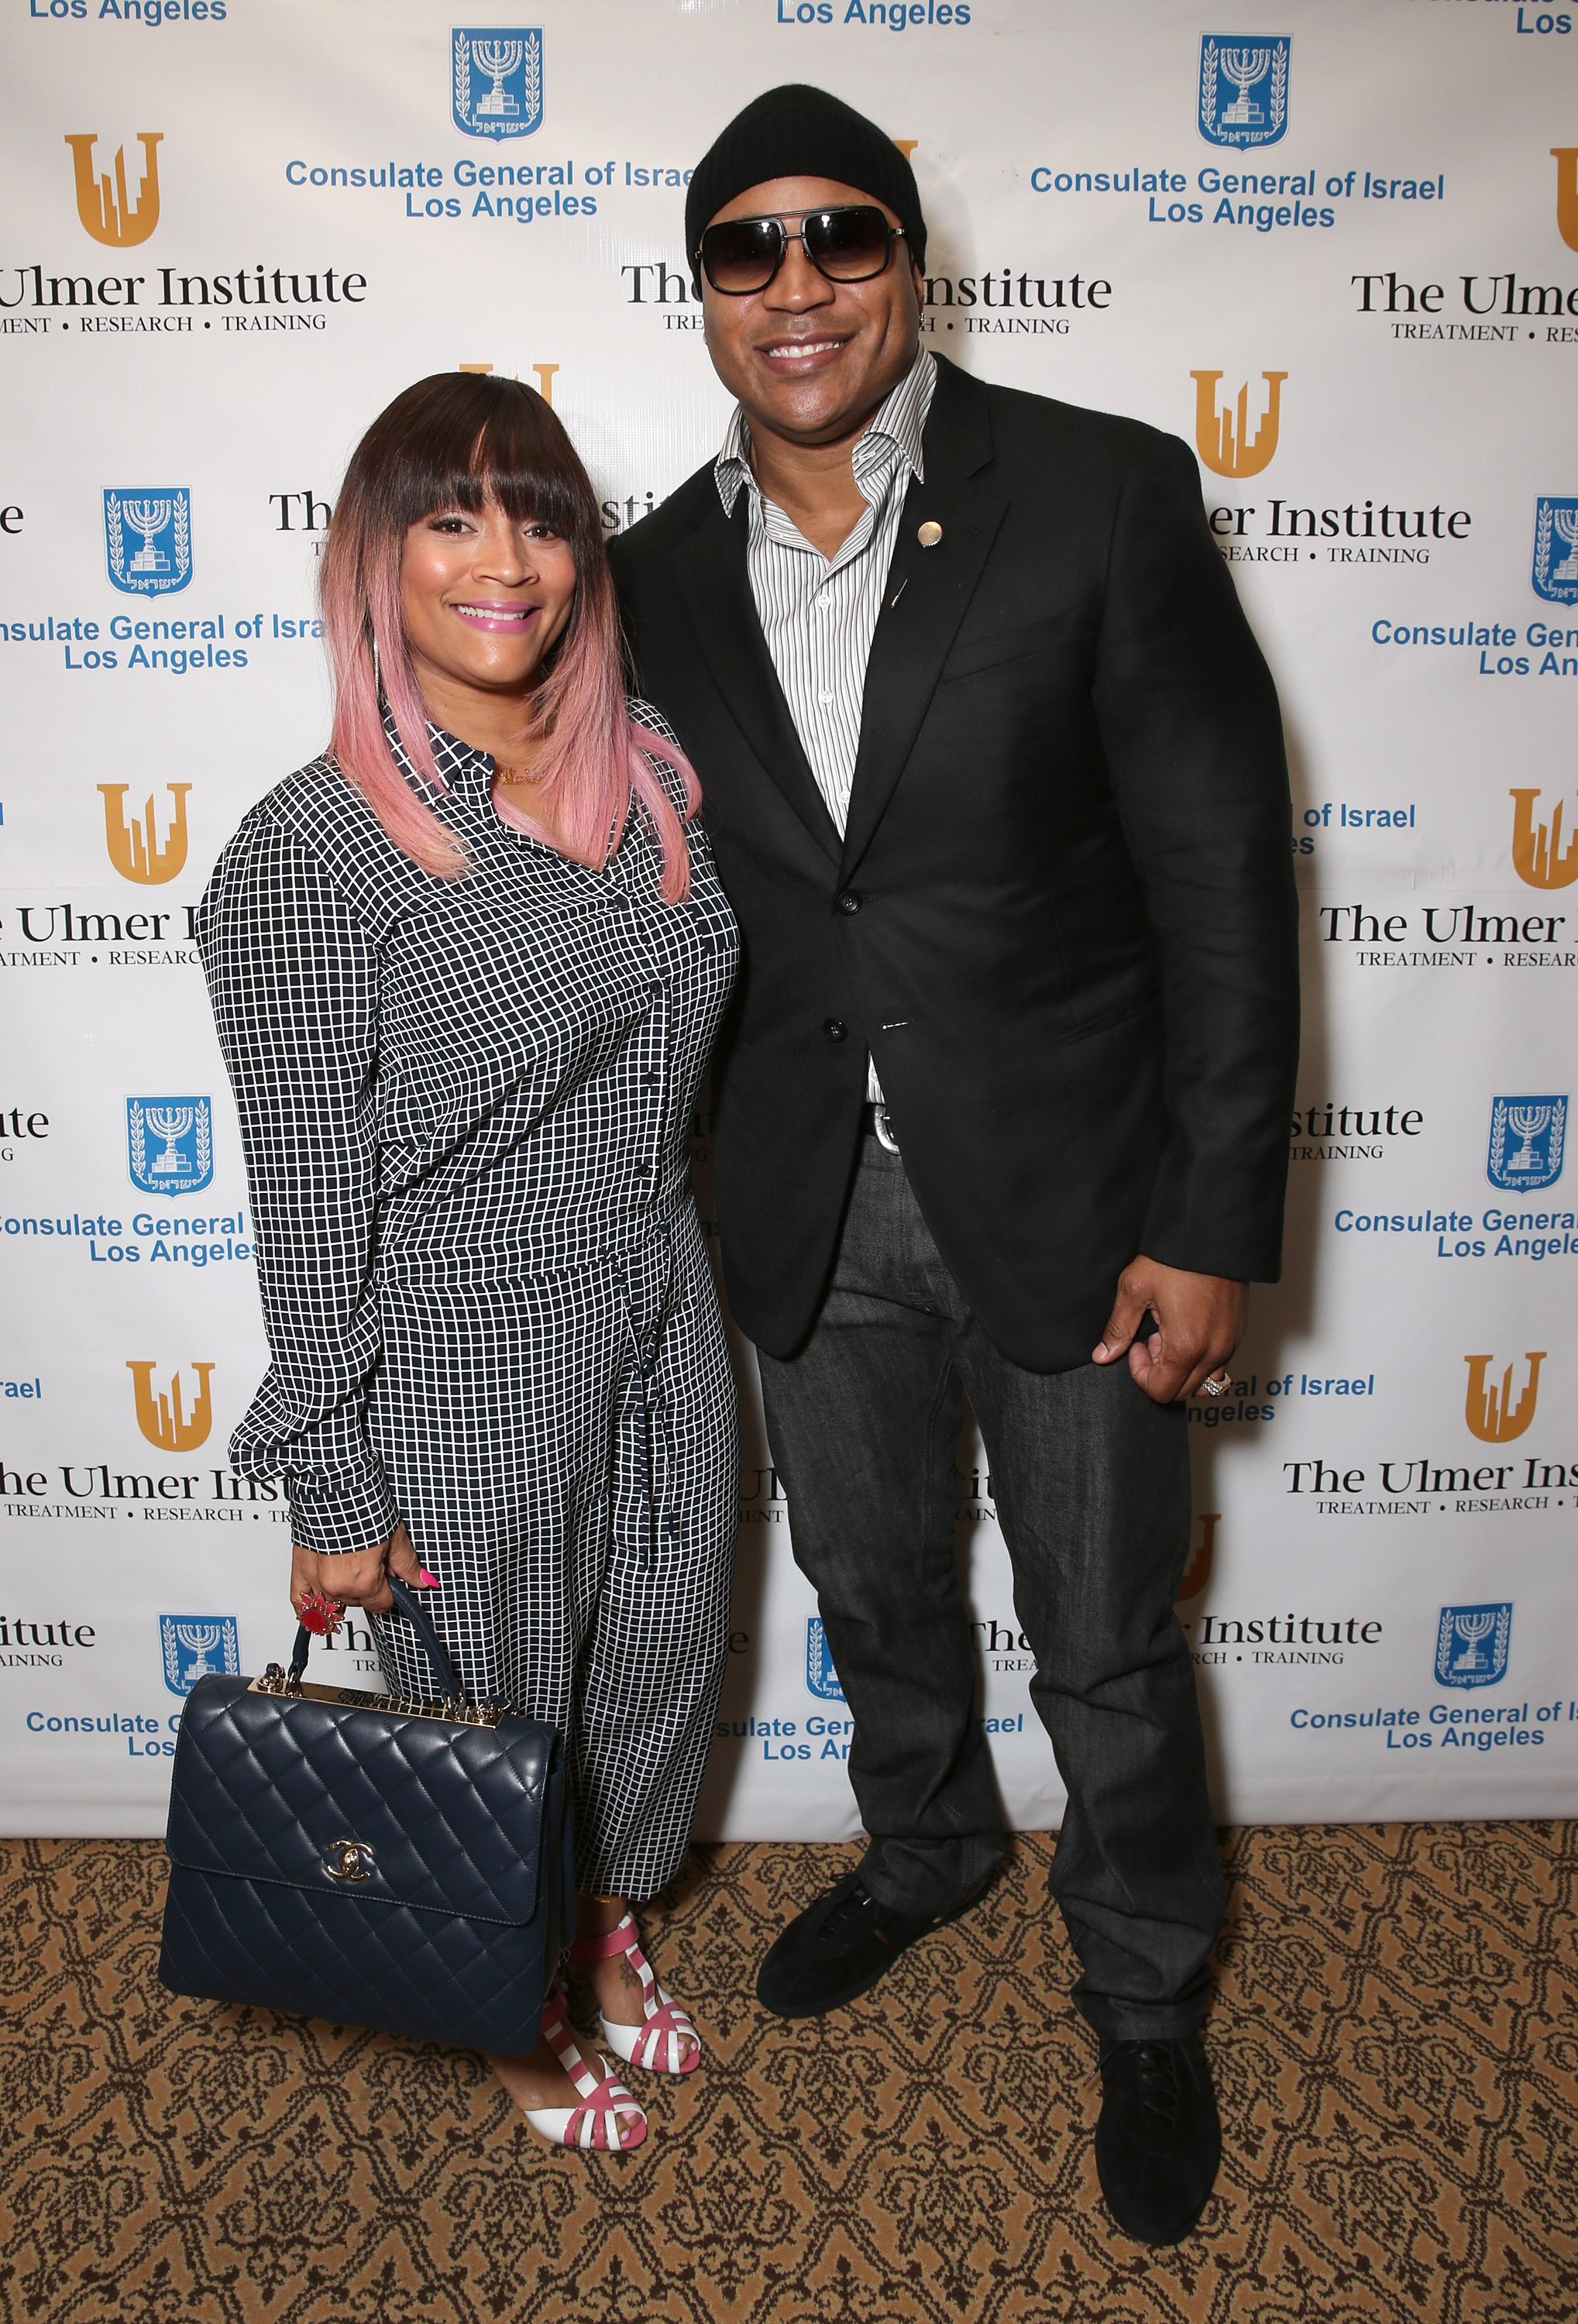 Simone Smith and LL Cool J at the Ulmer Institute Launch Celebration in Beverly Hills, California, 2016 | Photo: Getty Images